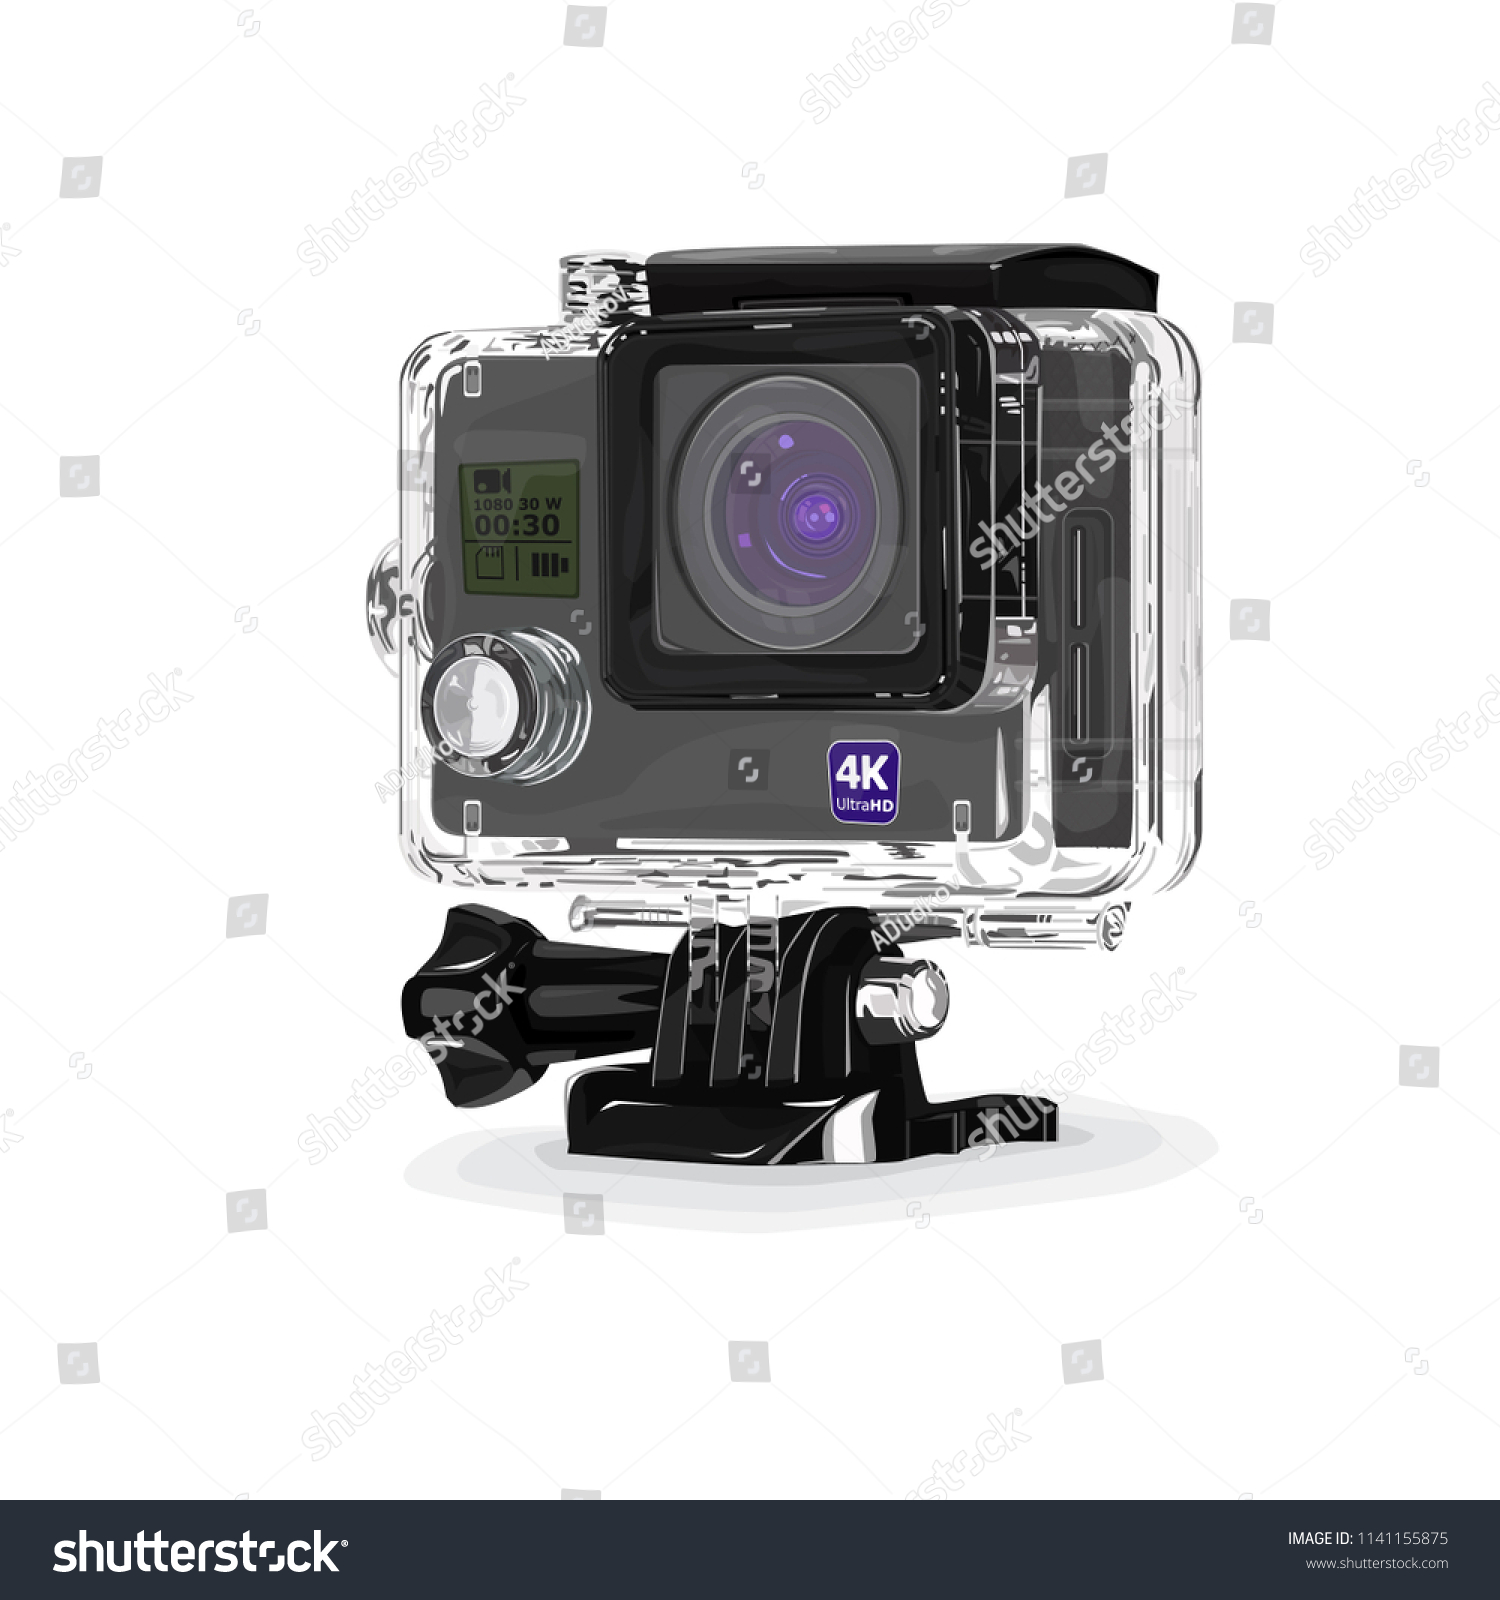 Action video camera in waterproof box. Gear for filming extreme sports. Realistic vector image isolated on white background  #1141155875